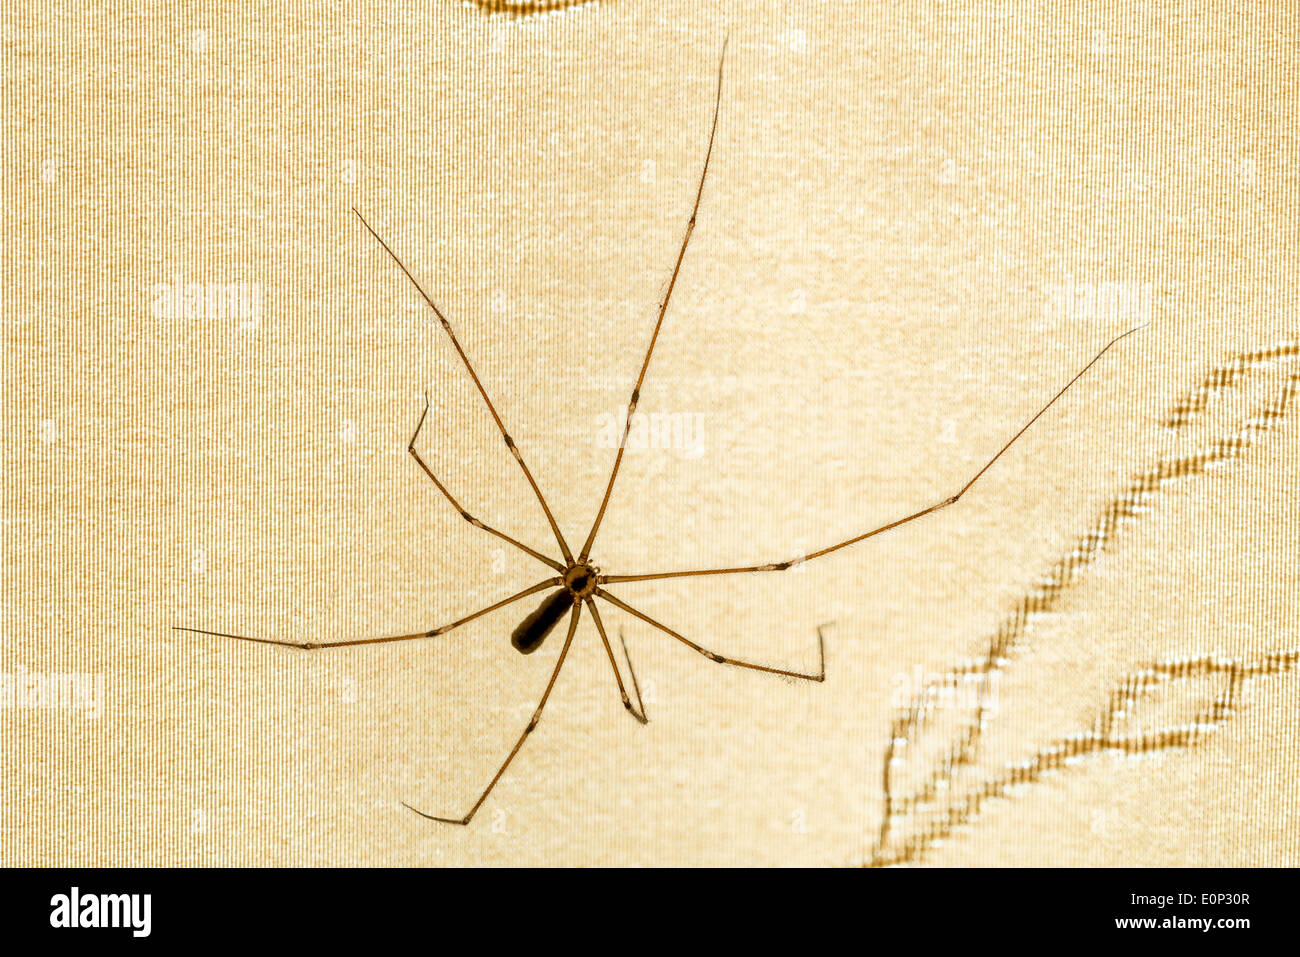 A house spider, pholcus phalangioides, on a curtain Stock Photo